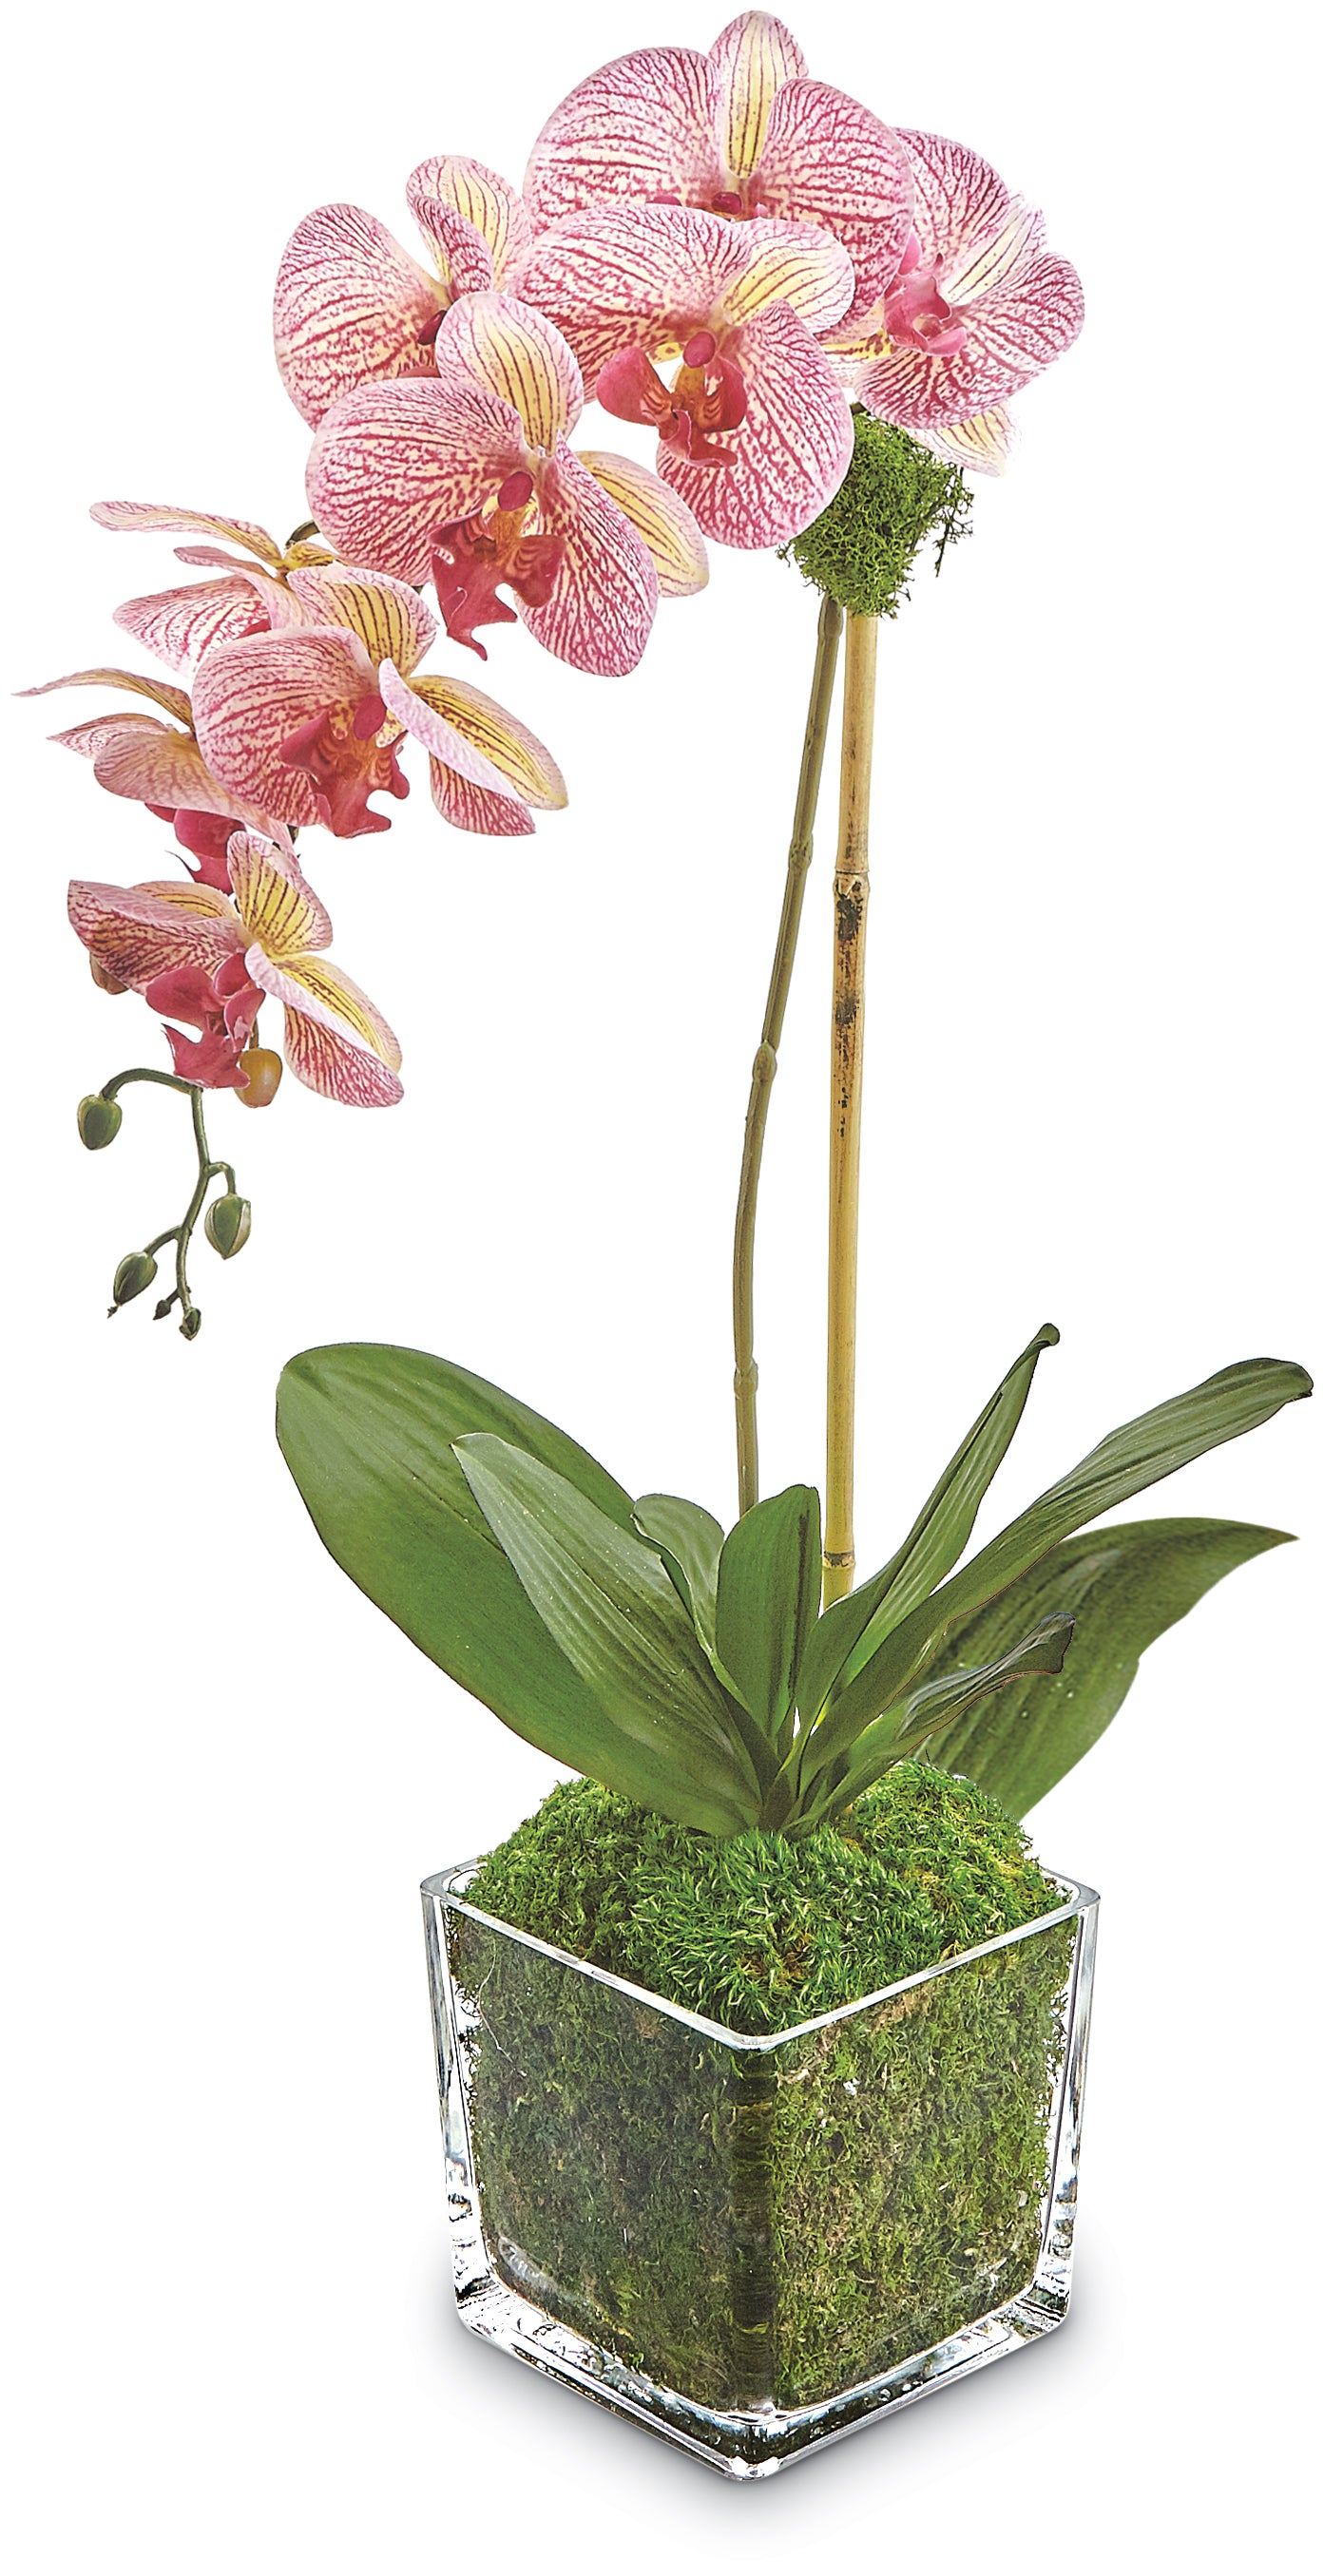 Phalaenopsis Orchid in Glass Pot - Striped